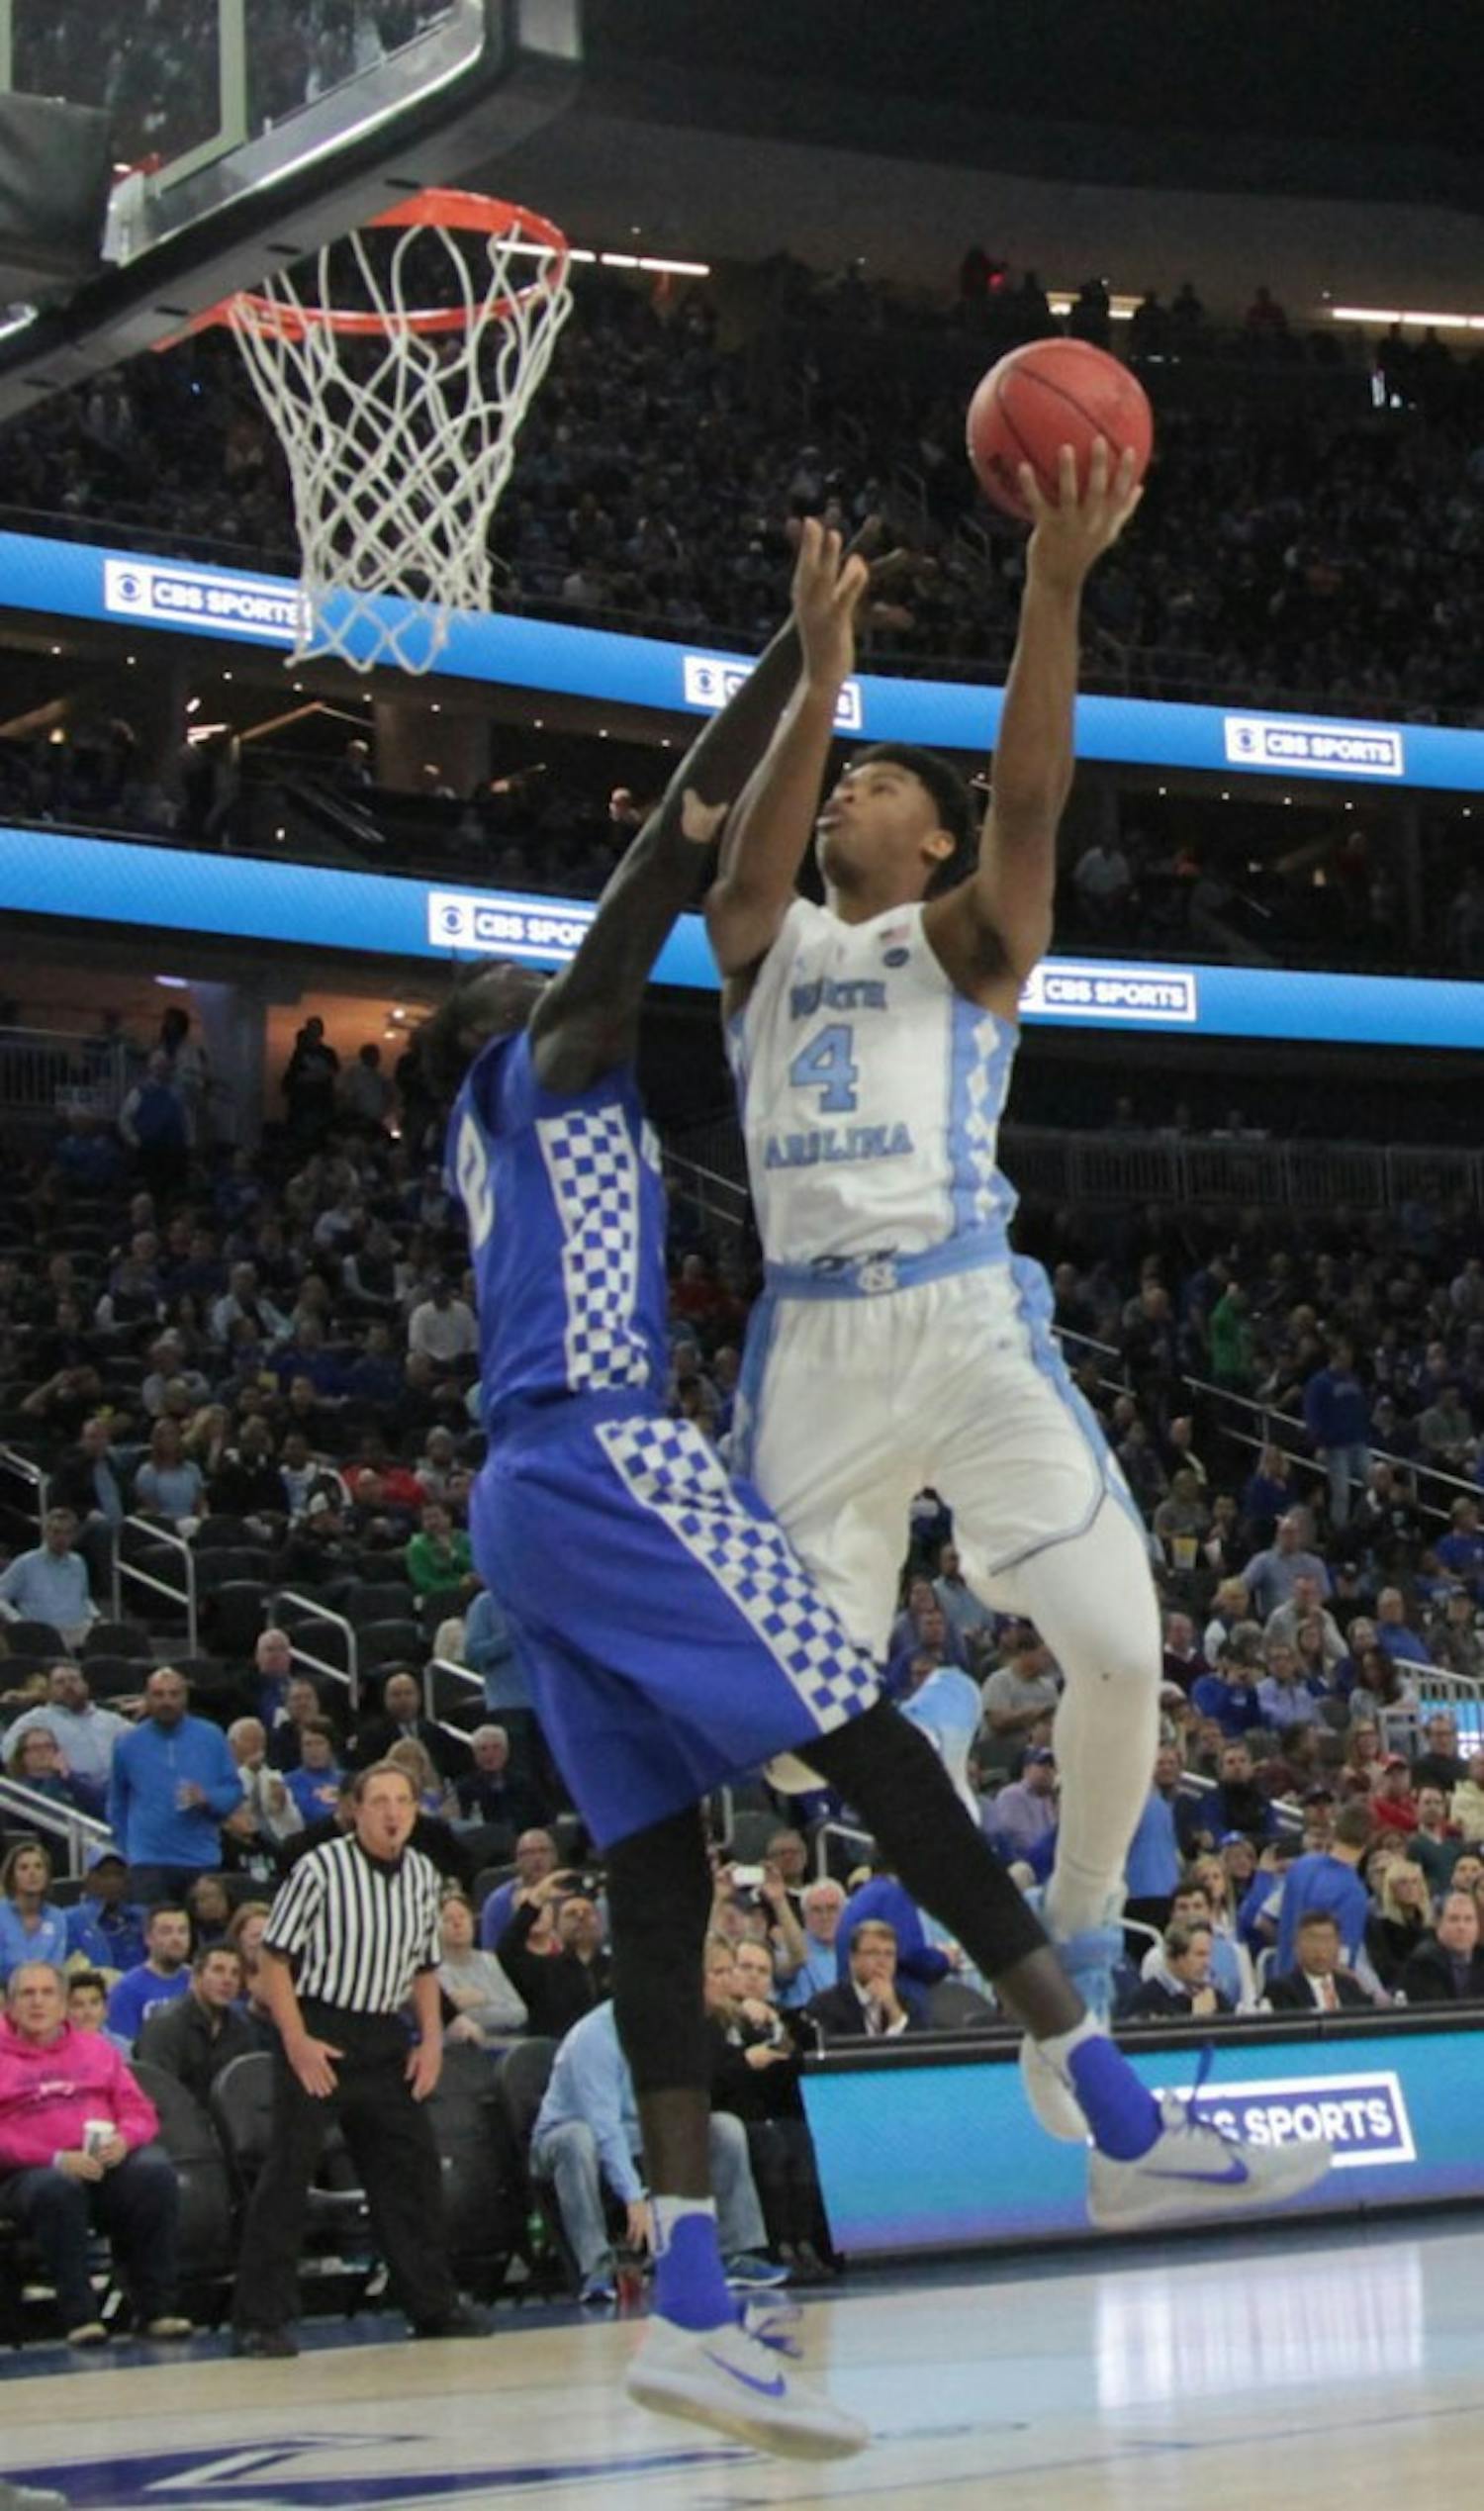 UNC forward Isaiah Hicks (4) goes up for a contested layup against Kentucky at the CBS Sports Classic on Saturday.